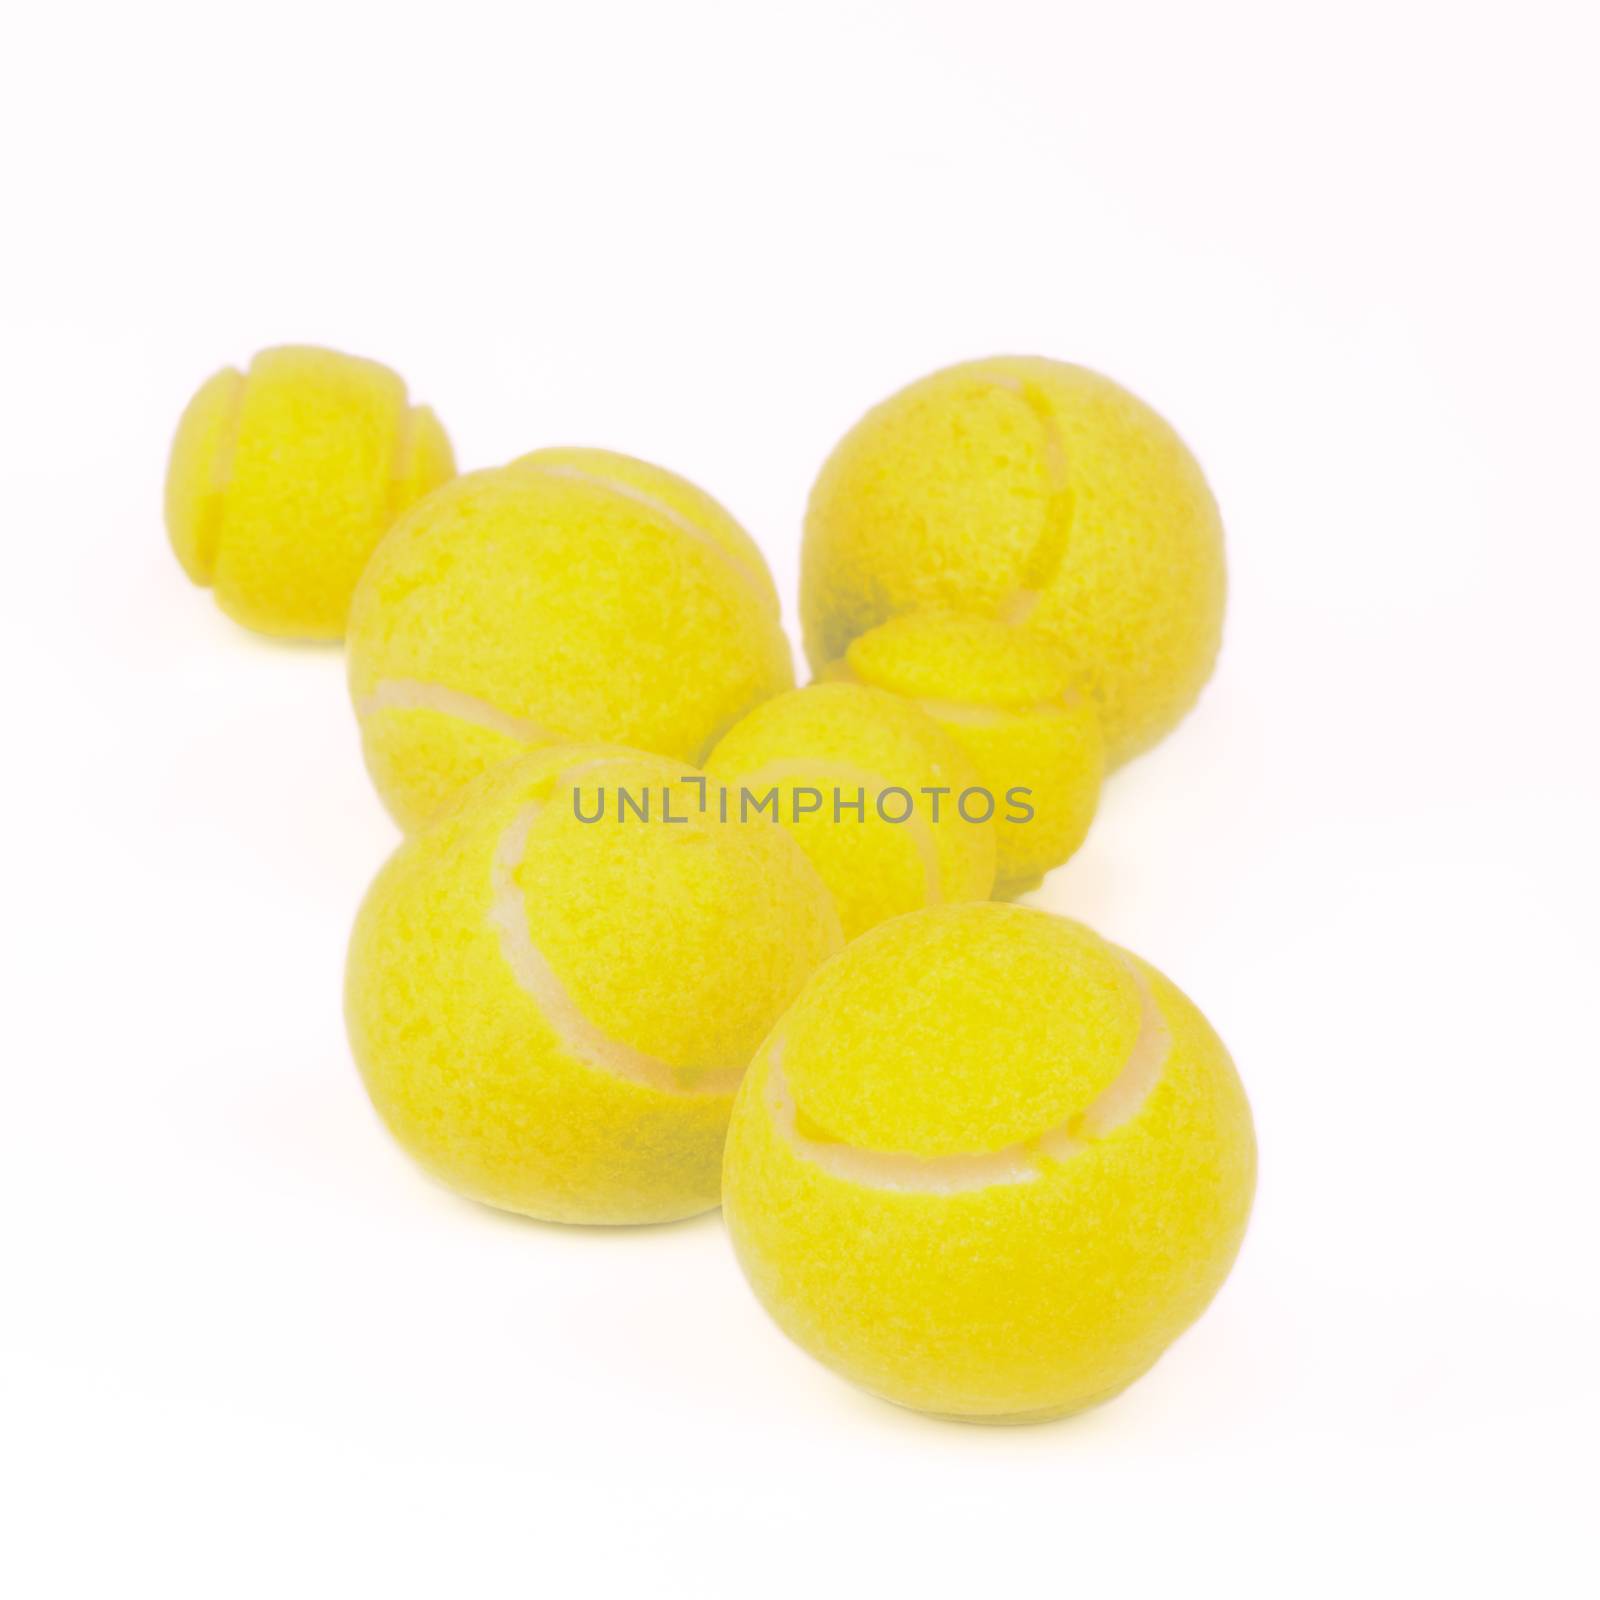 Arrangement of Tennis Balls isolated on white background. Focus on Foreground